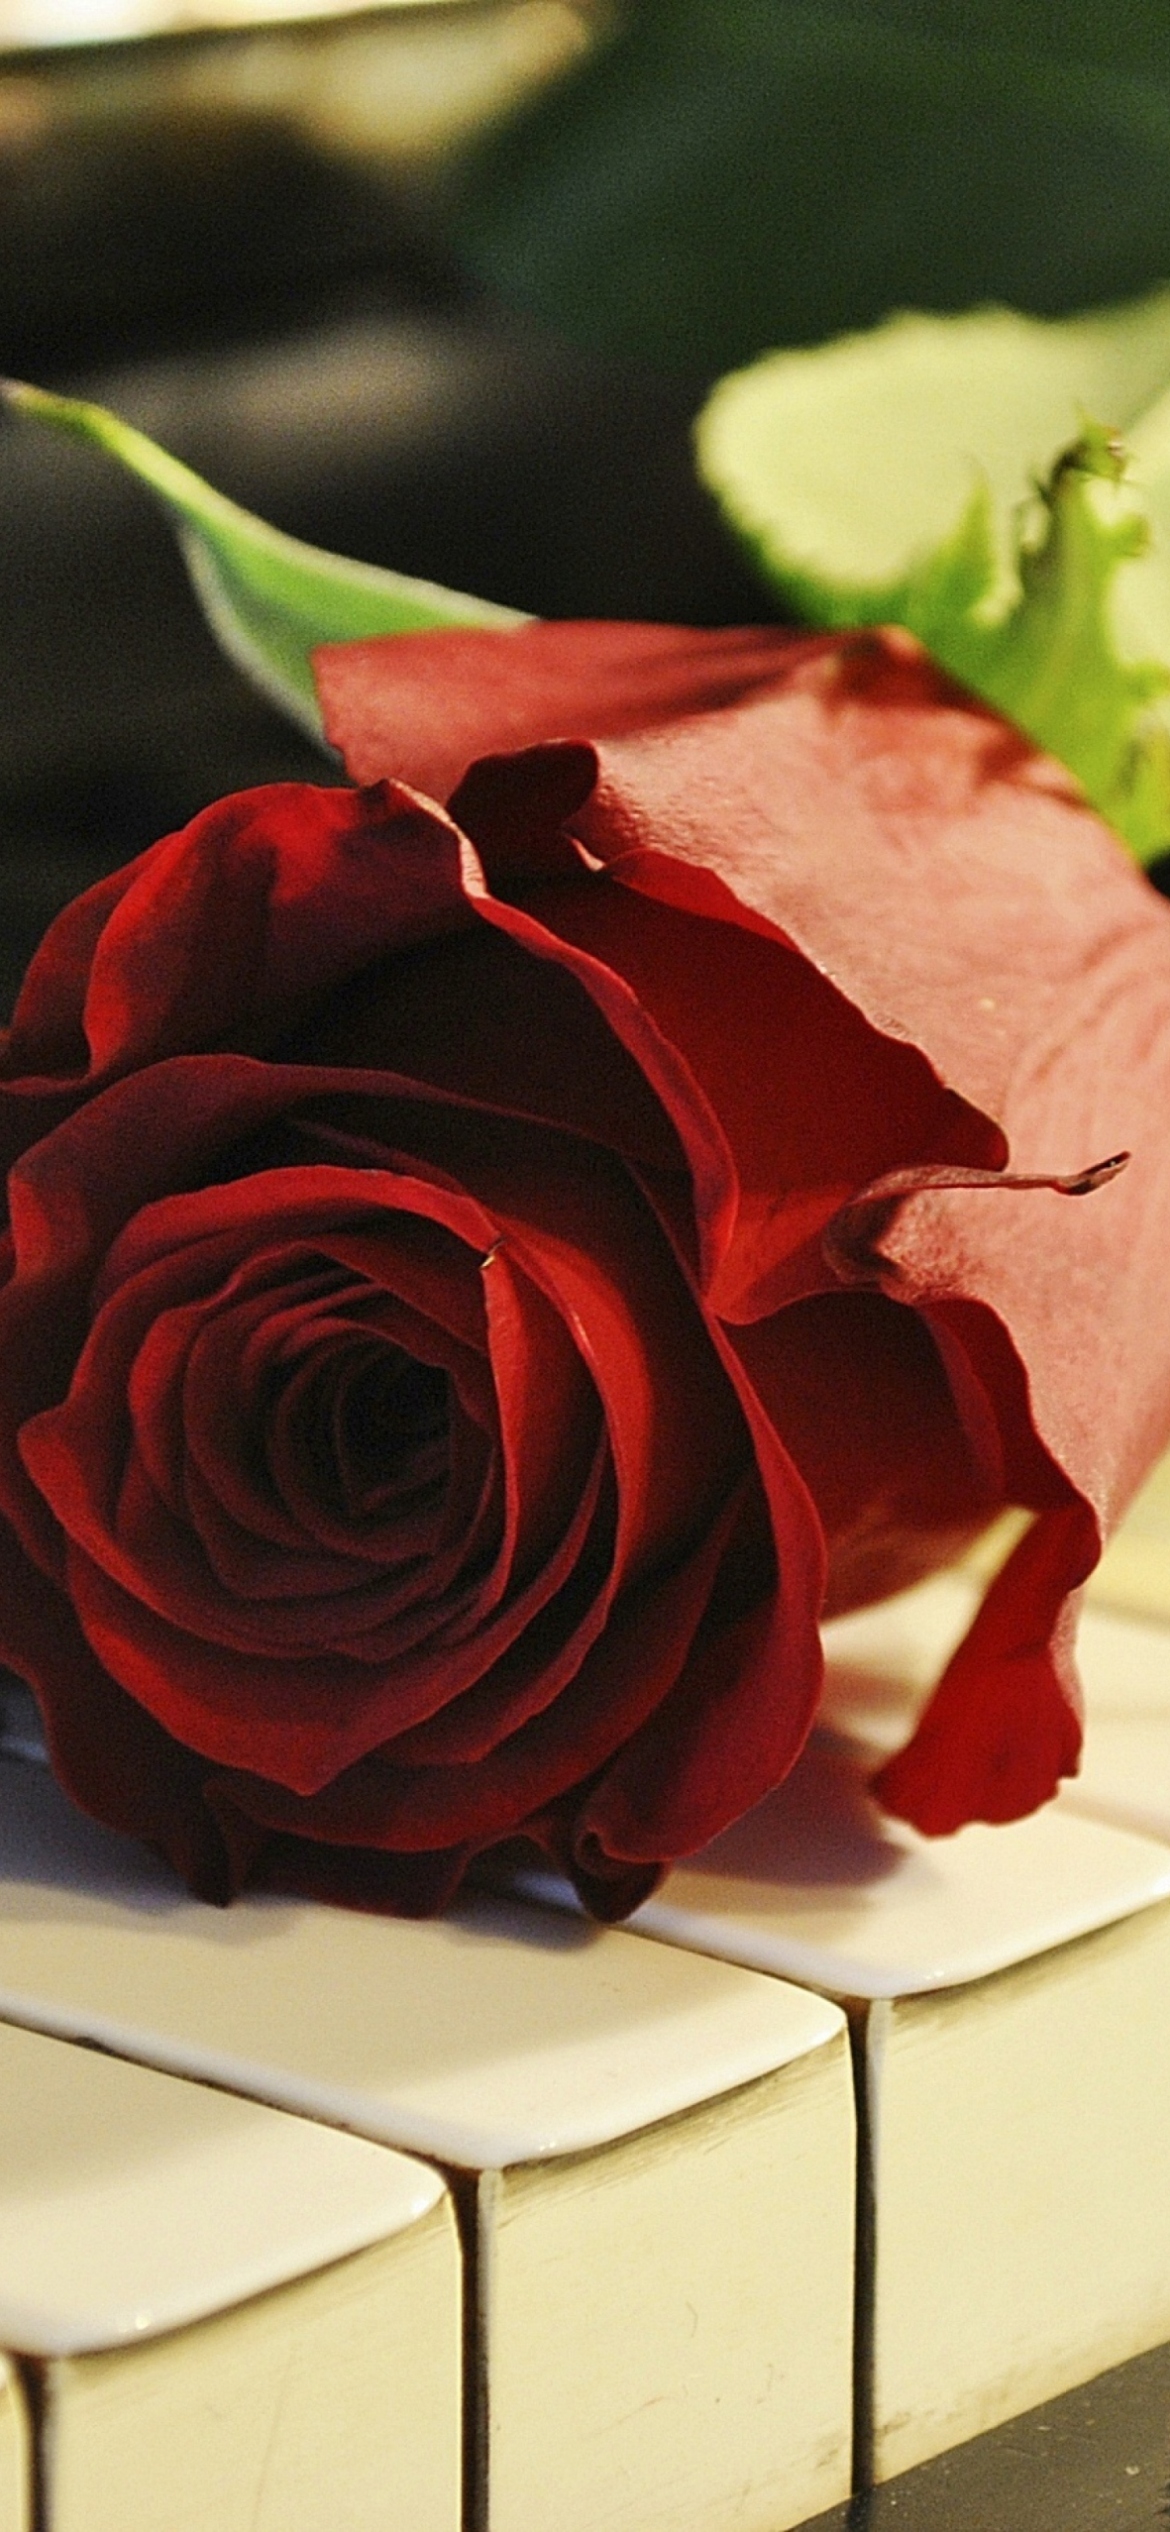 Rose On Piano wallpaper 1170x2532